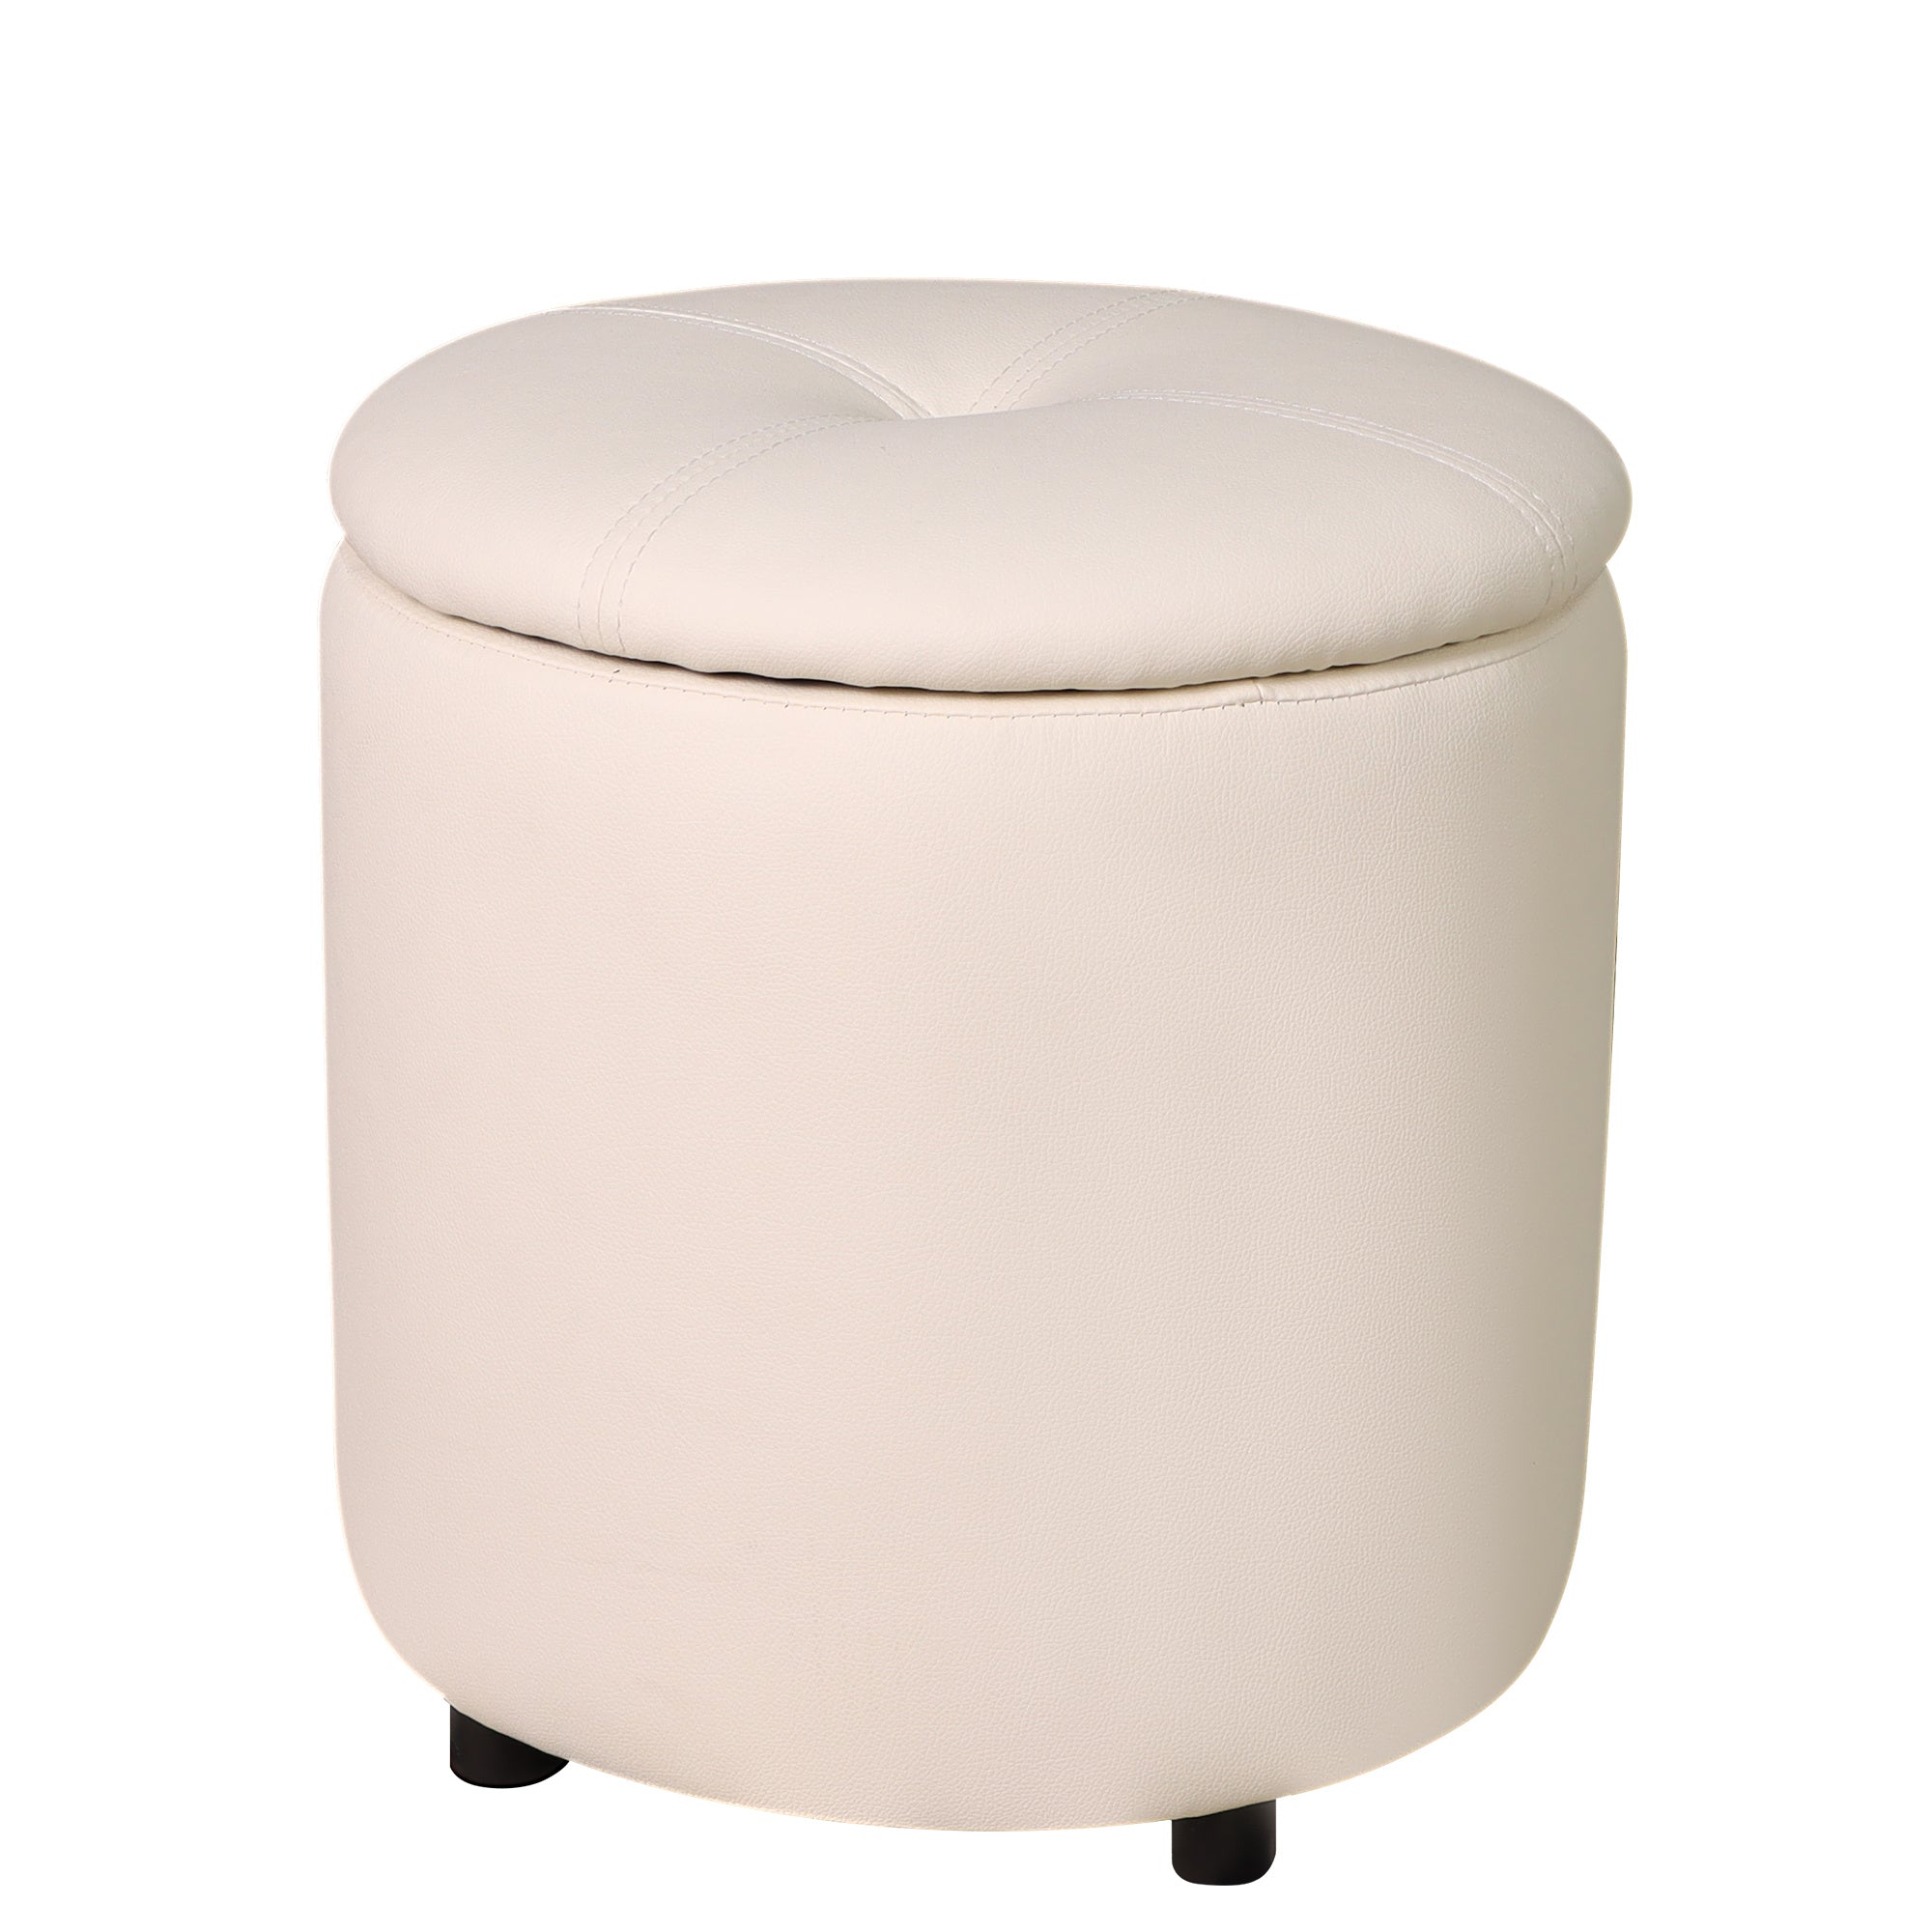 Round Storage Ottoman Faux Leather Upholstered Footrest Stool for the Living Room Bedroom